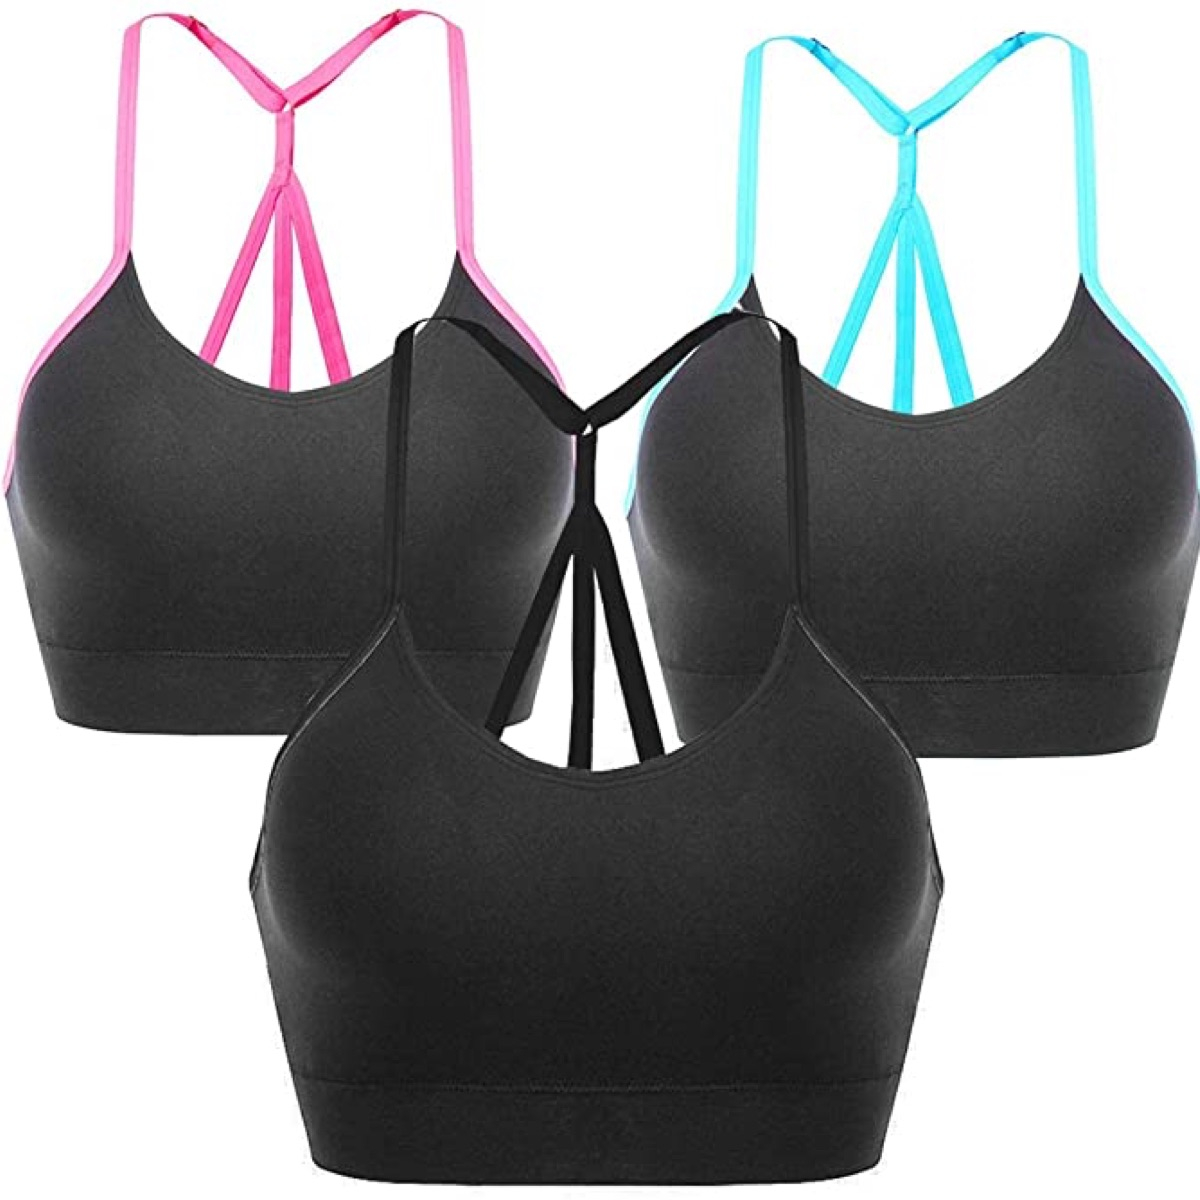 This $14 Pack of Sports Bras Has 23,500+ Five-Star Reviews on